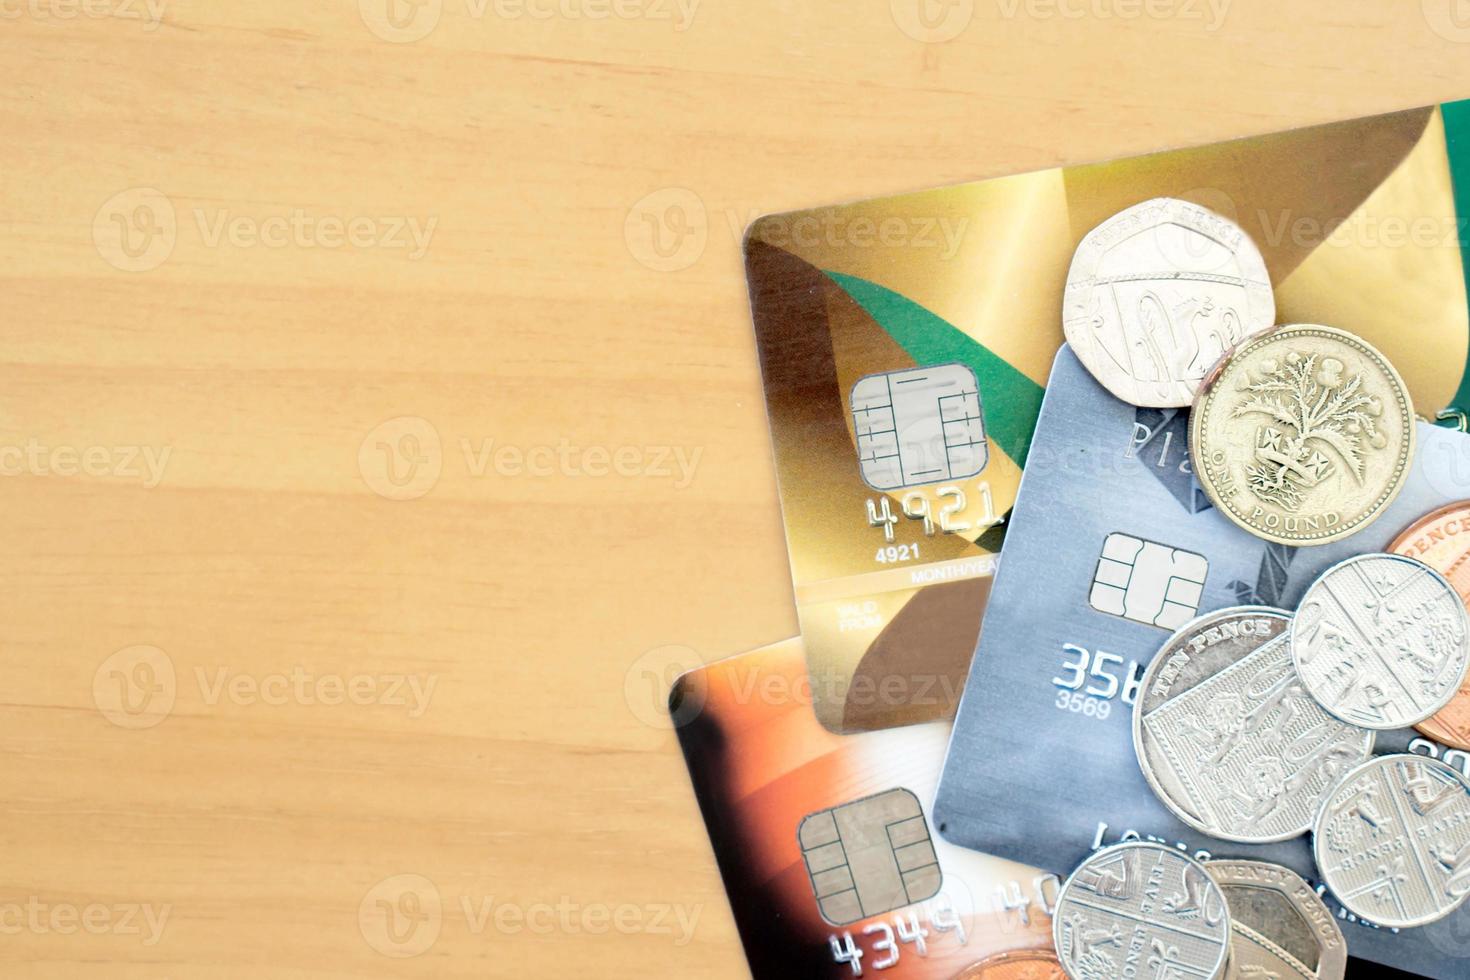 Credit cards,coins, close-up view photo